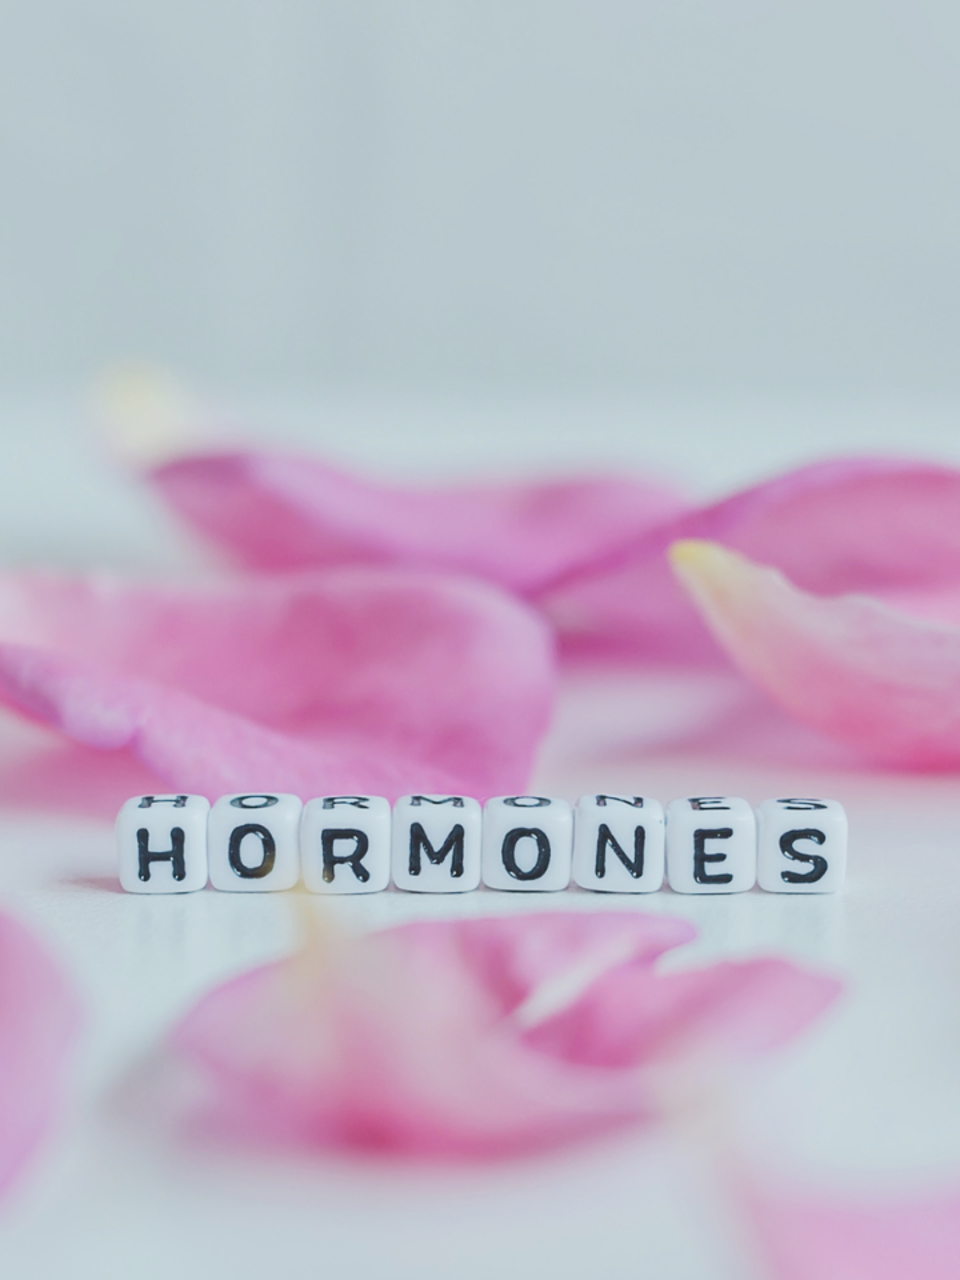 9 simple daily habits that improve overall hormone health | Times of India